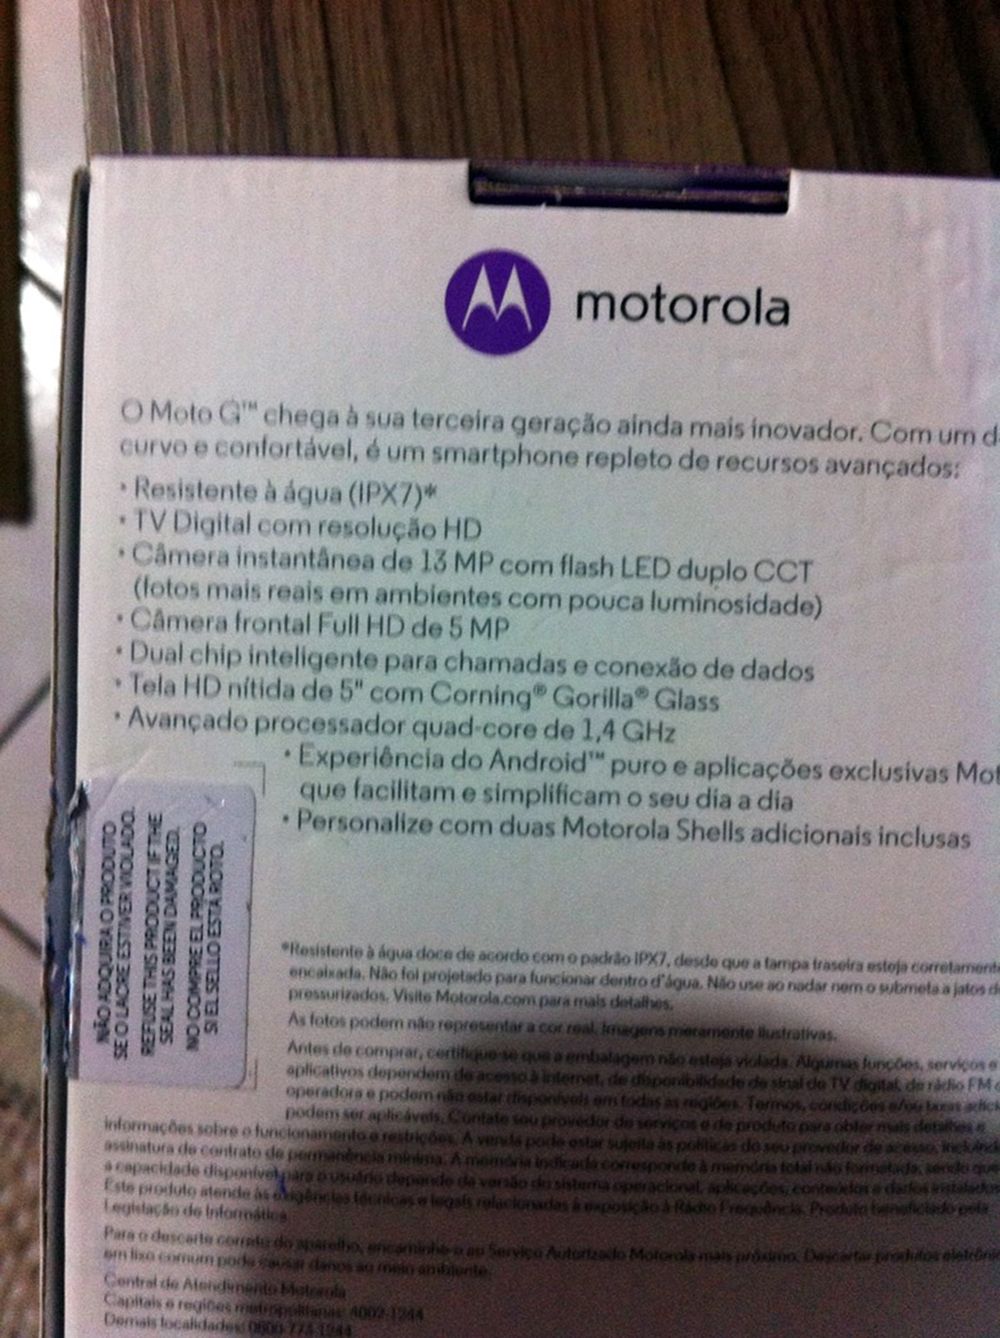 moto g 2015 leaks ahead of expected reveal at motorola launch later today image 2